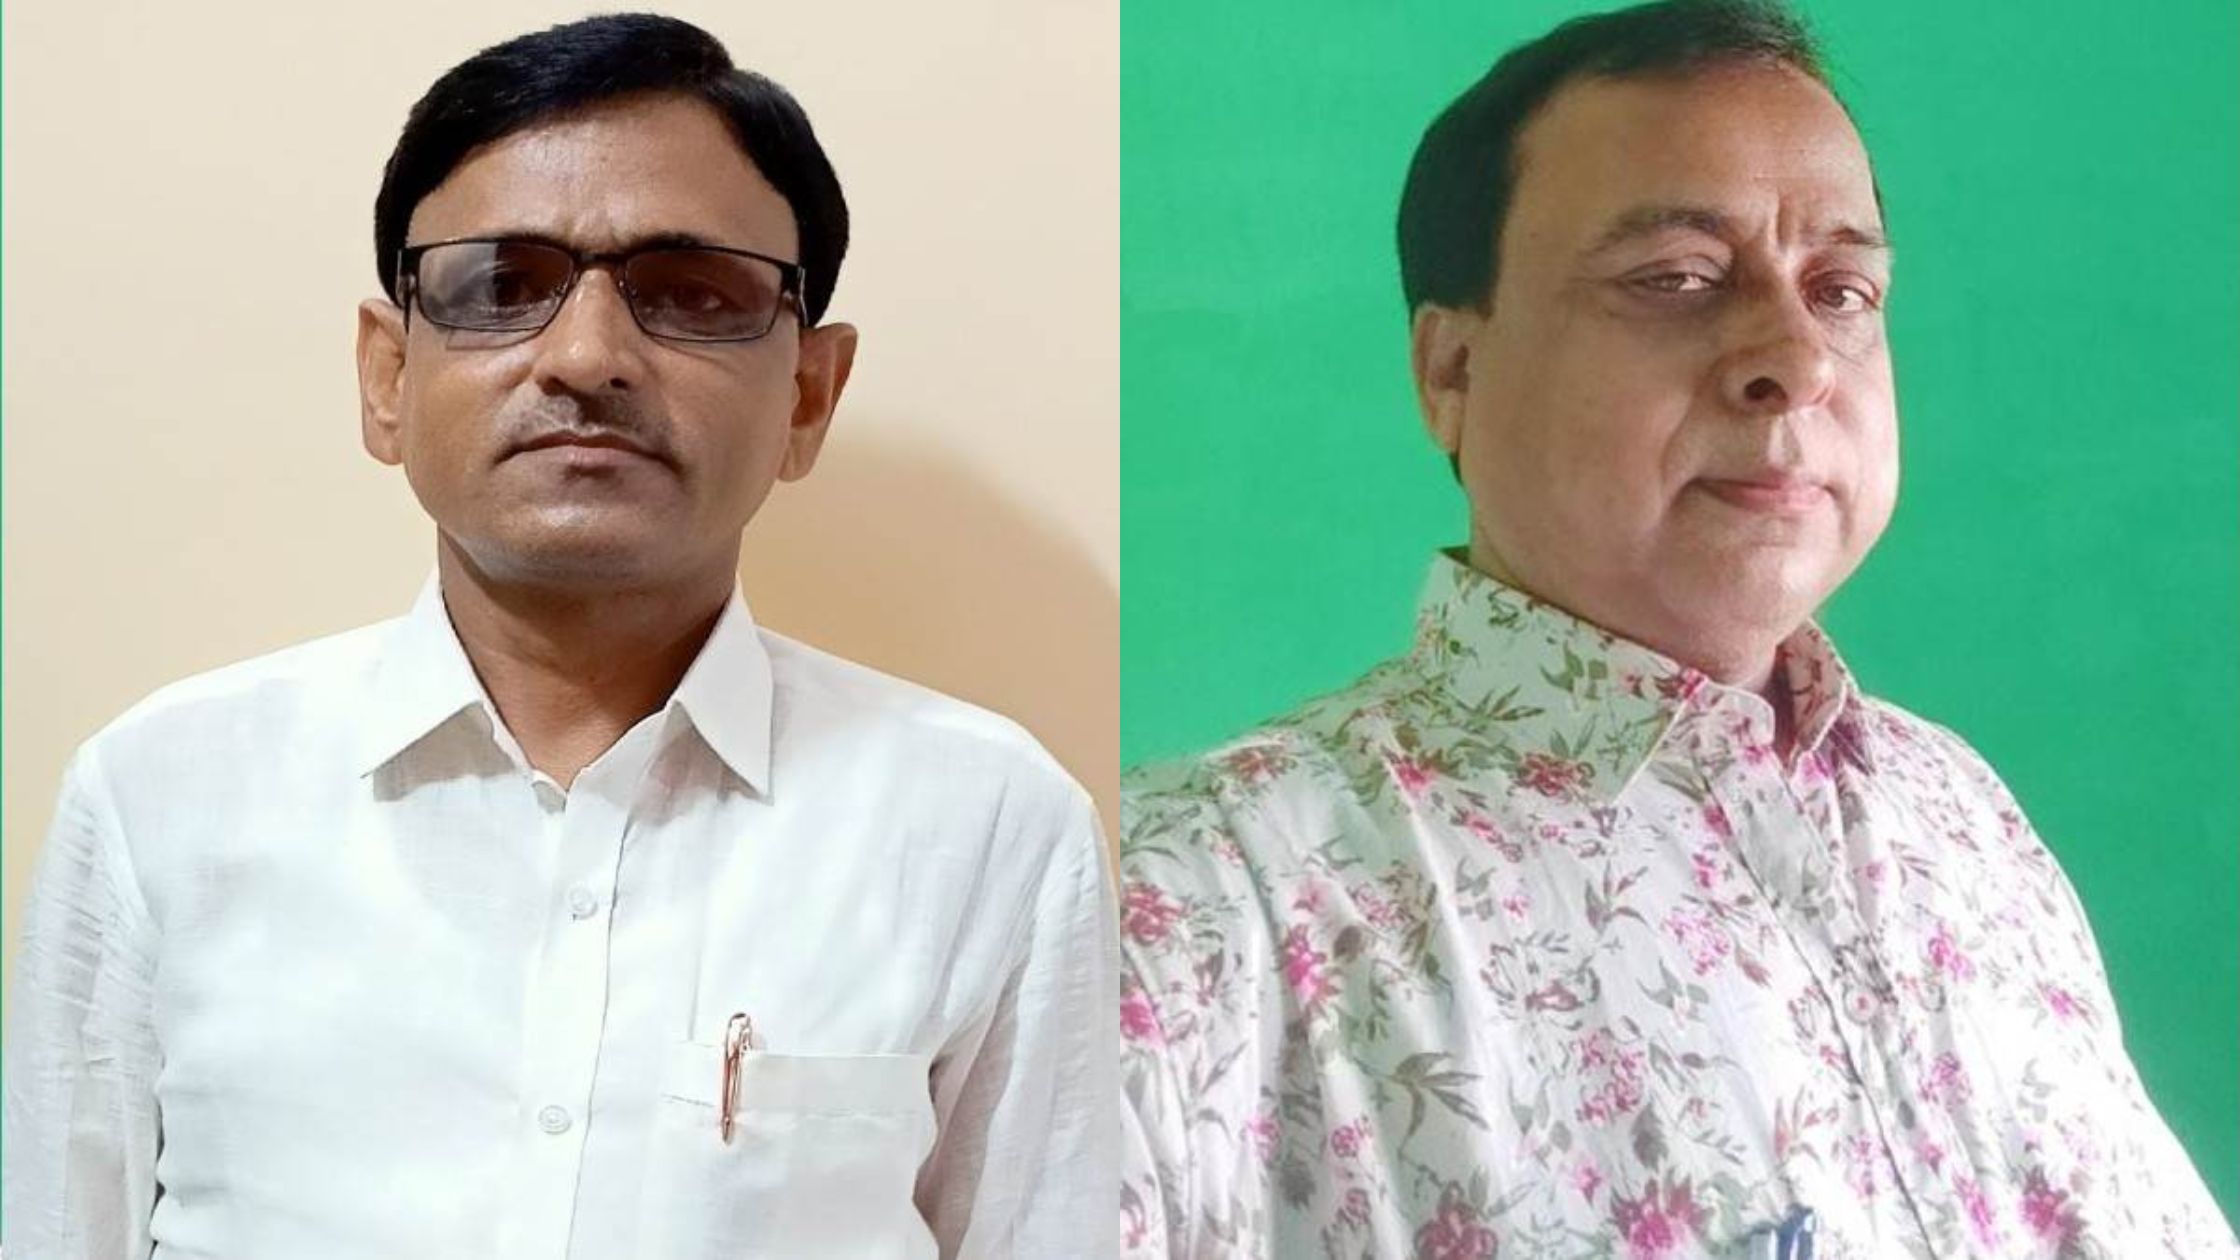 two teachers of araria selected for the state teacher award